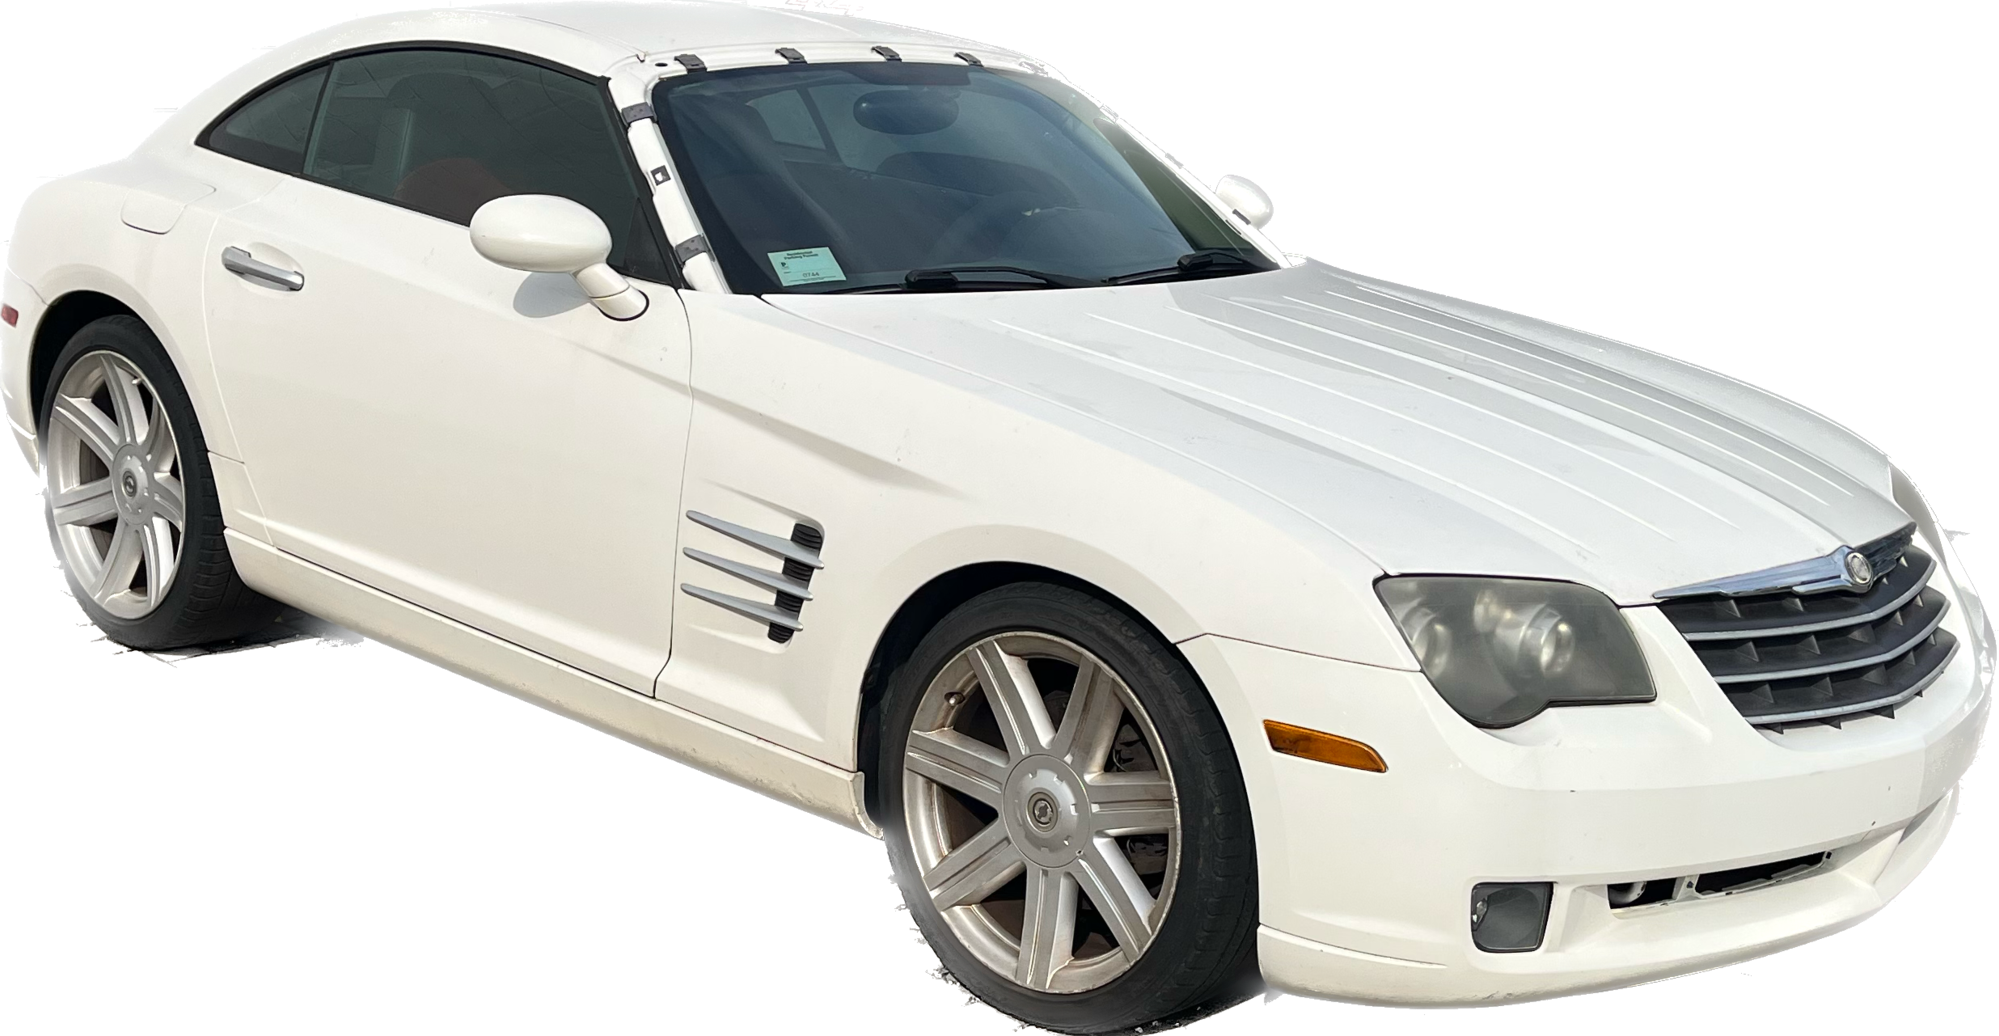 2004 Chrysler Crossfire - 2004 Chrysler Crossfire - Used - VIN 1C3AN69L94X012915 - 151,900 Miles - 6 cyl - 2WD - Automatic - Coupe - White - Lexington, KY 40513, United States